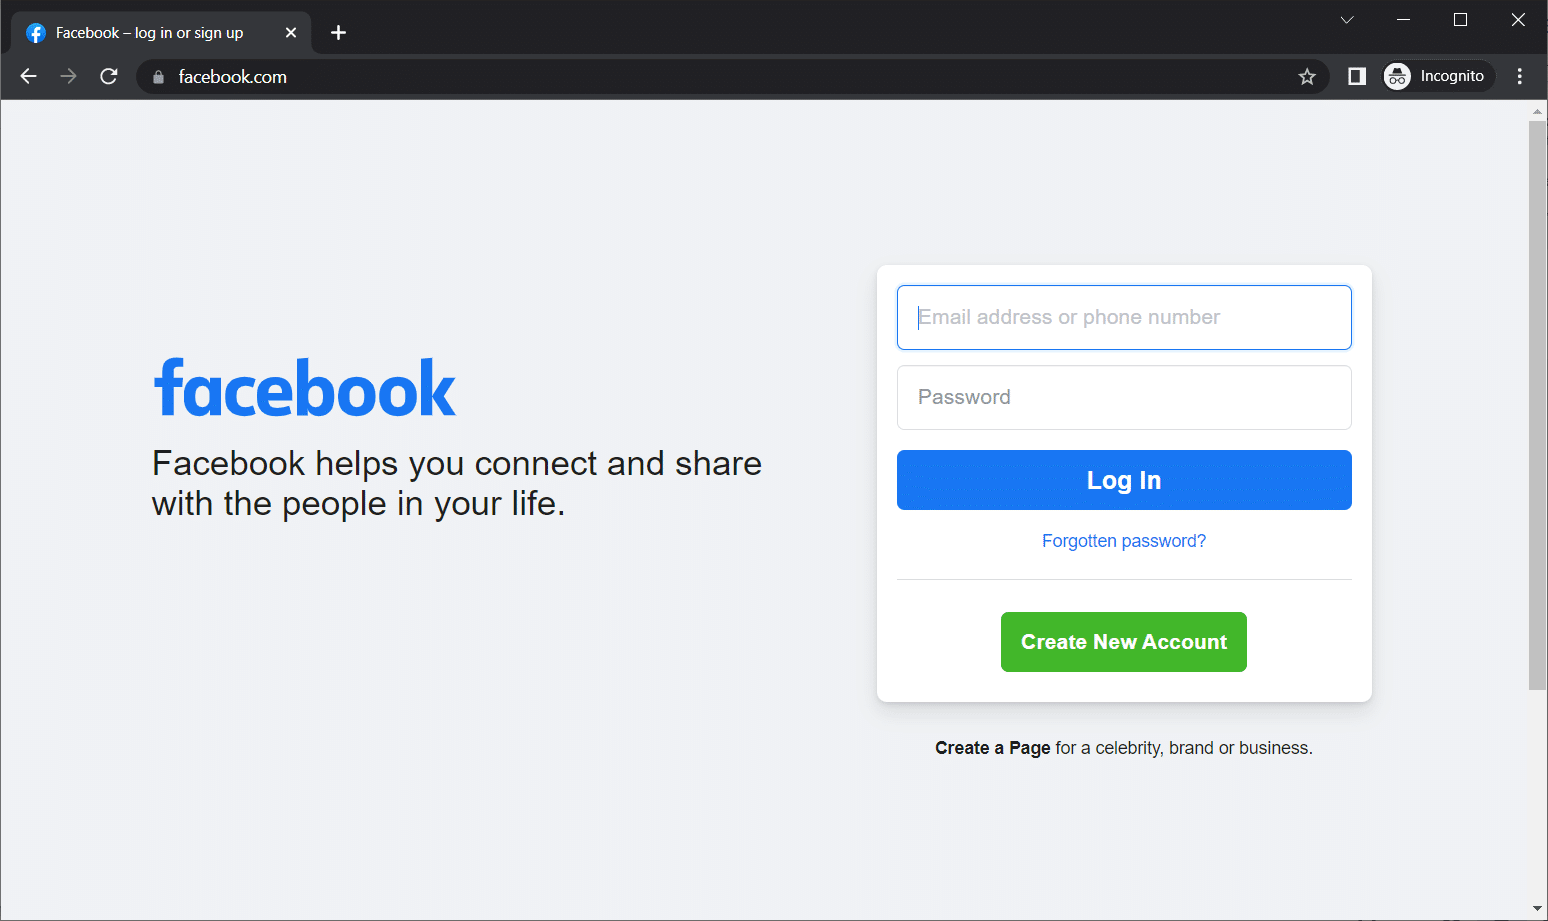 Login to Facebook in Incognito mode